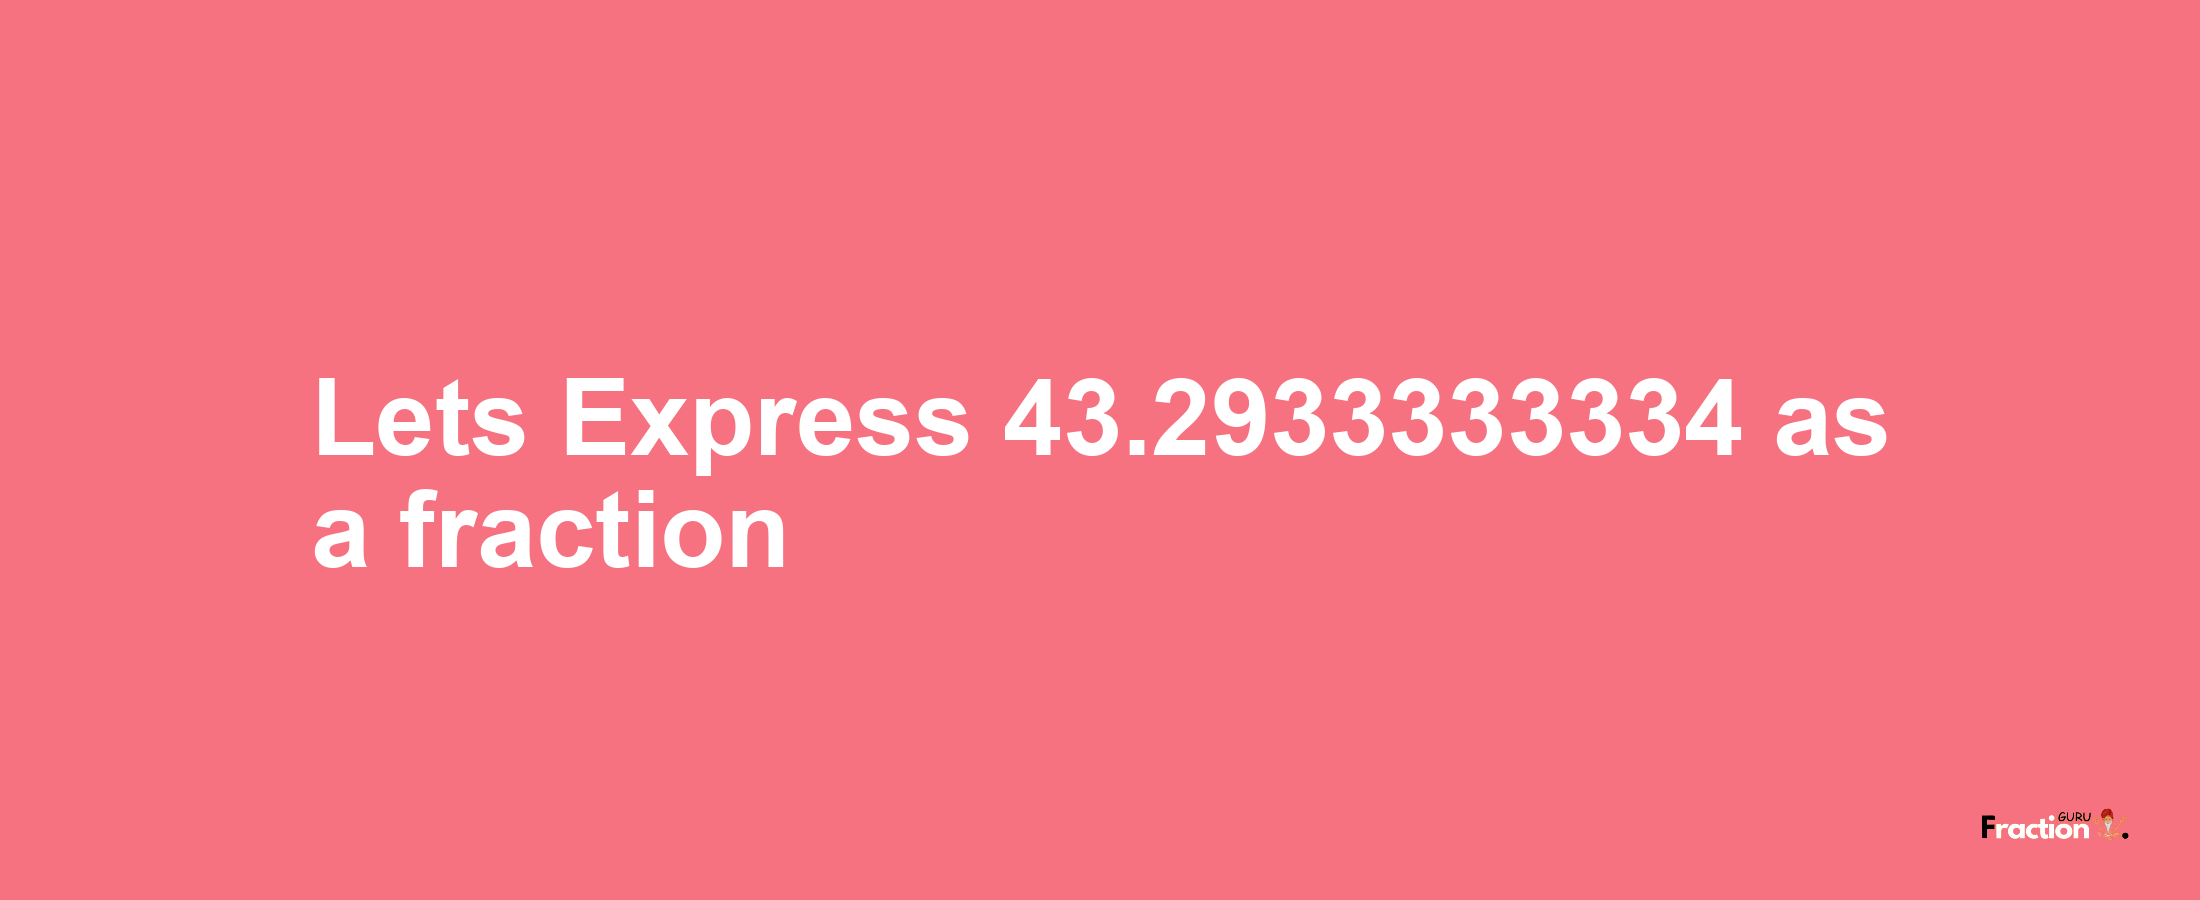 Lets Express 43.2933333334 as afraction